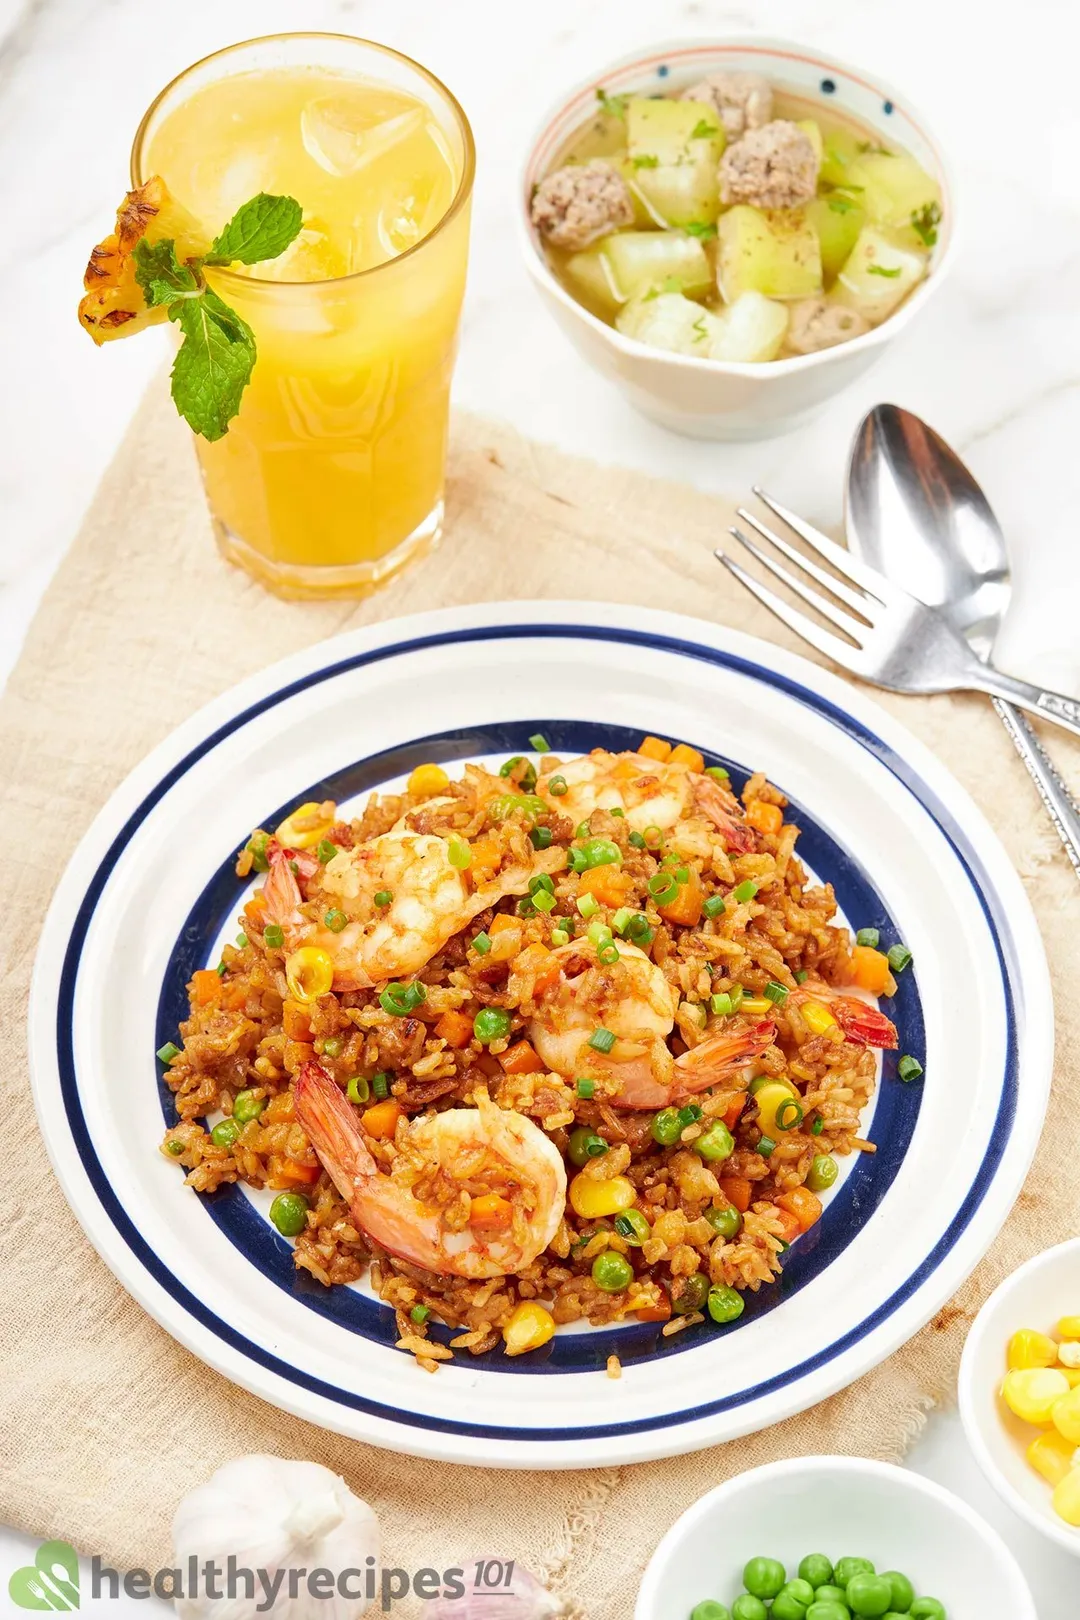 What to Serve With Shrimp Fried Rice